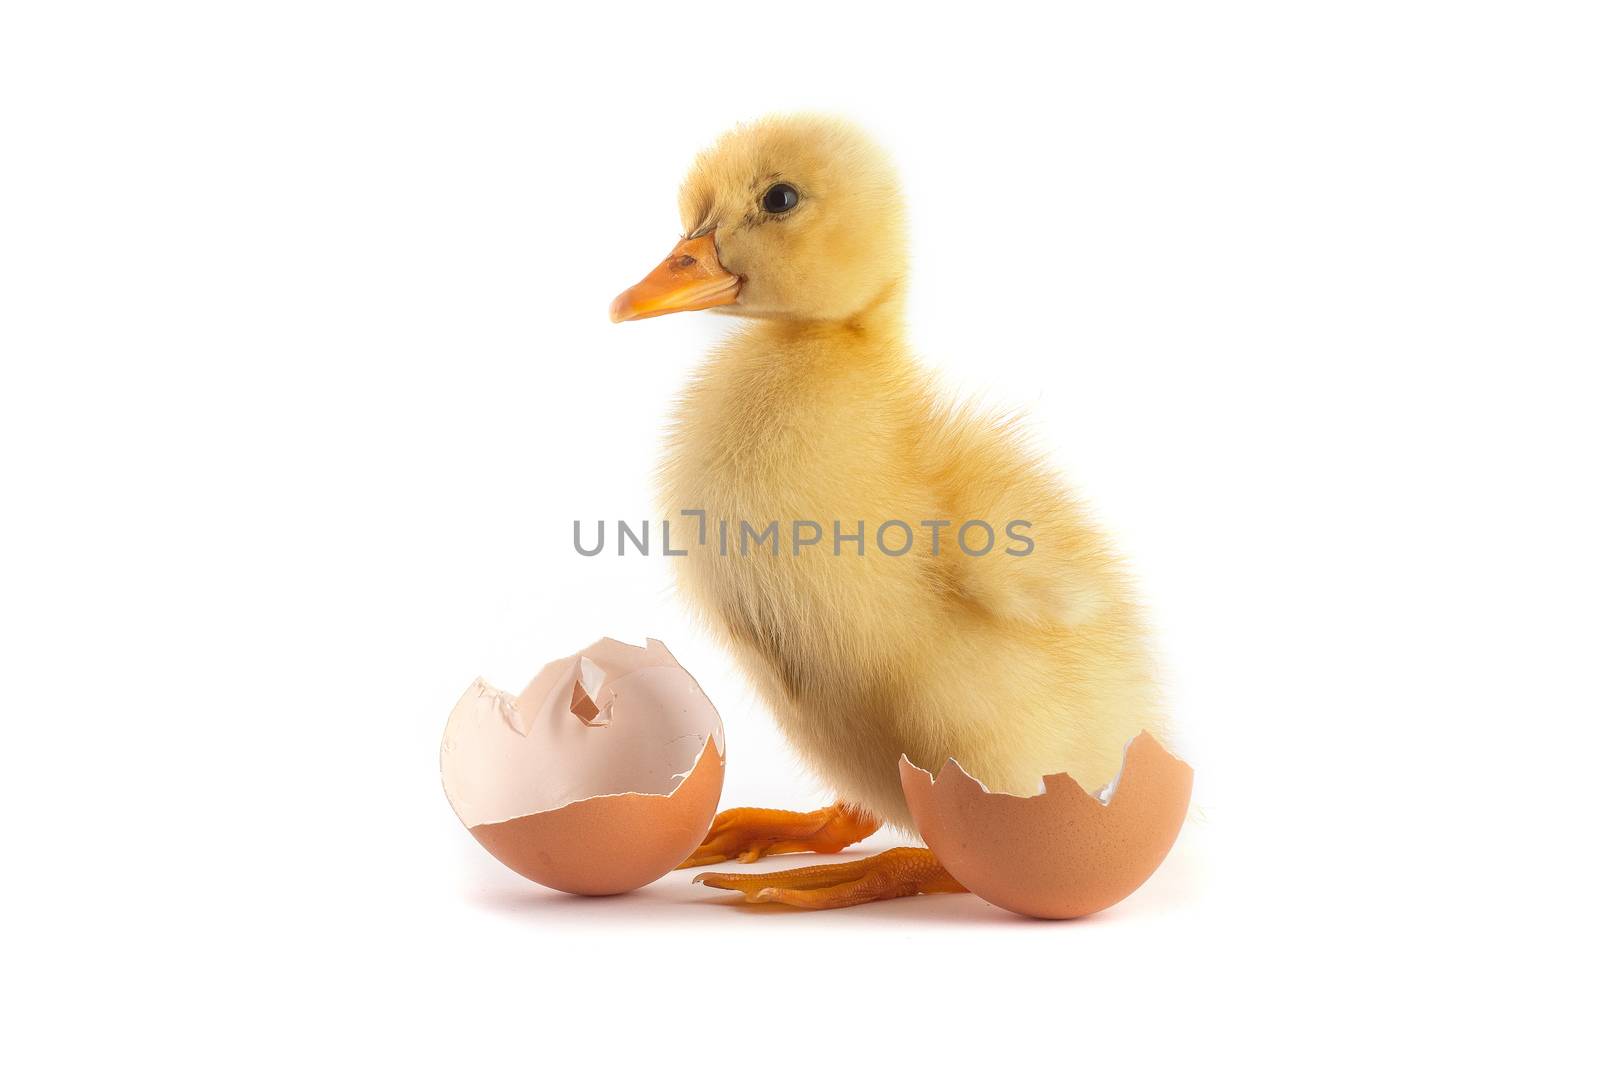 Yellow small duckling with egg on a white by bloodua